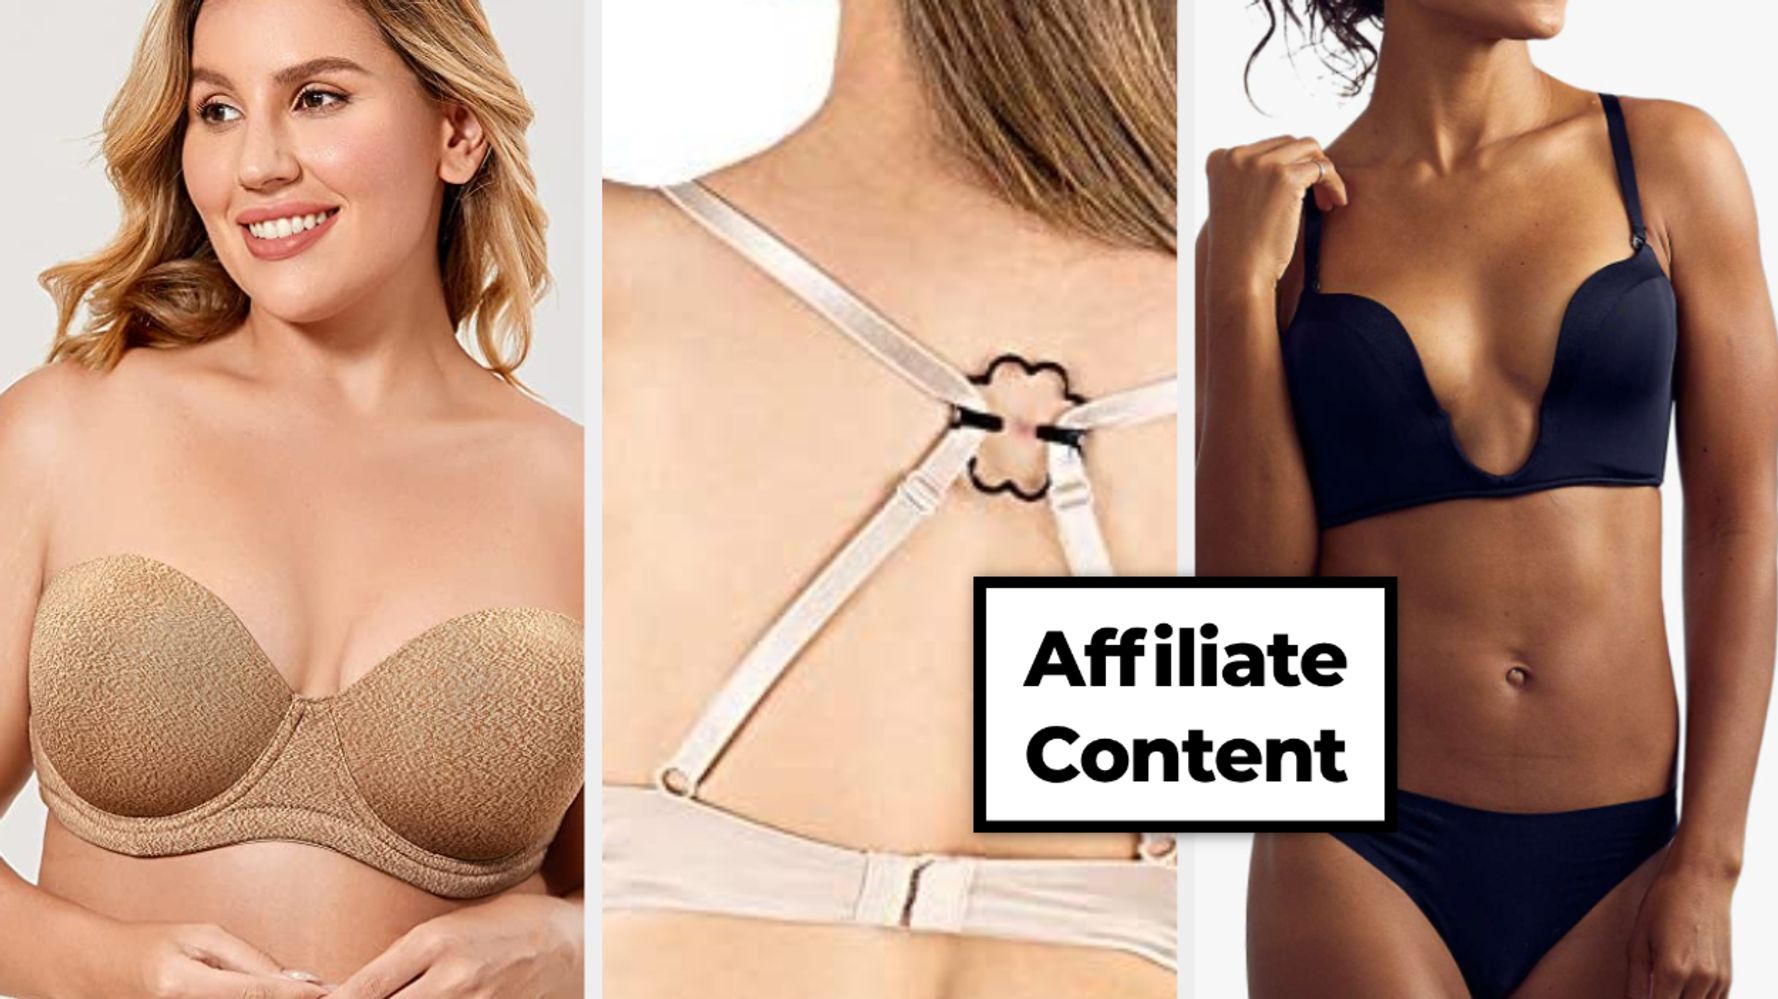 15 Backless and Strapless Bra Solutions For Babes With Bigger